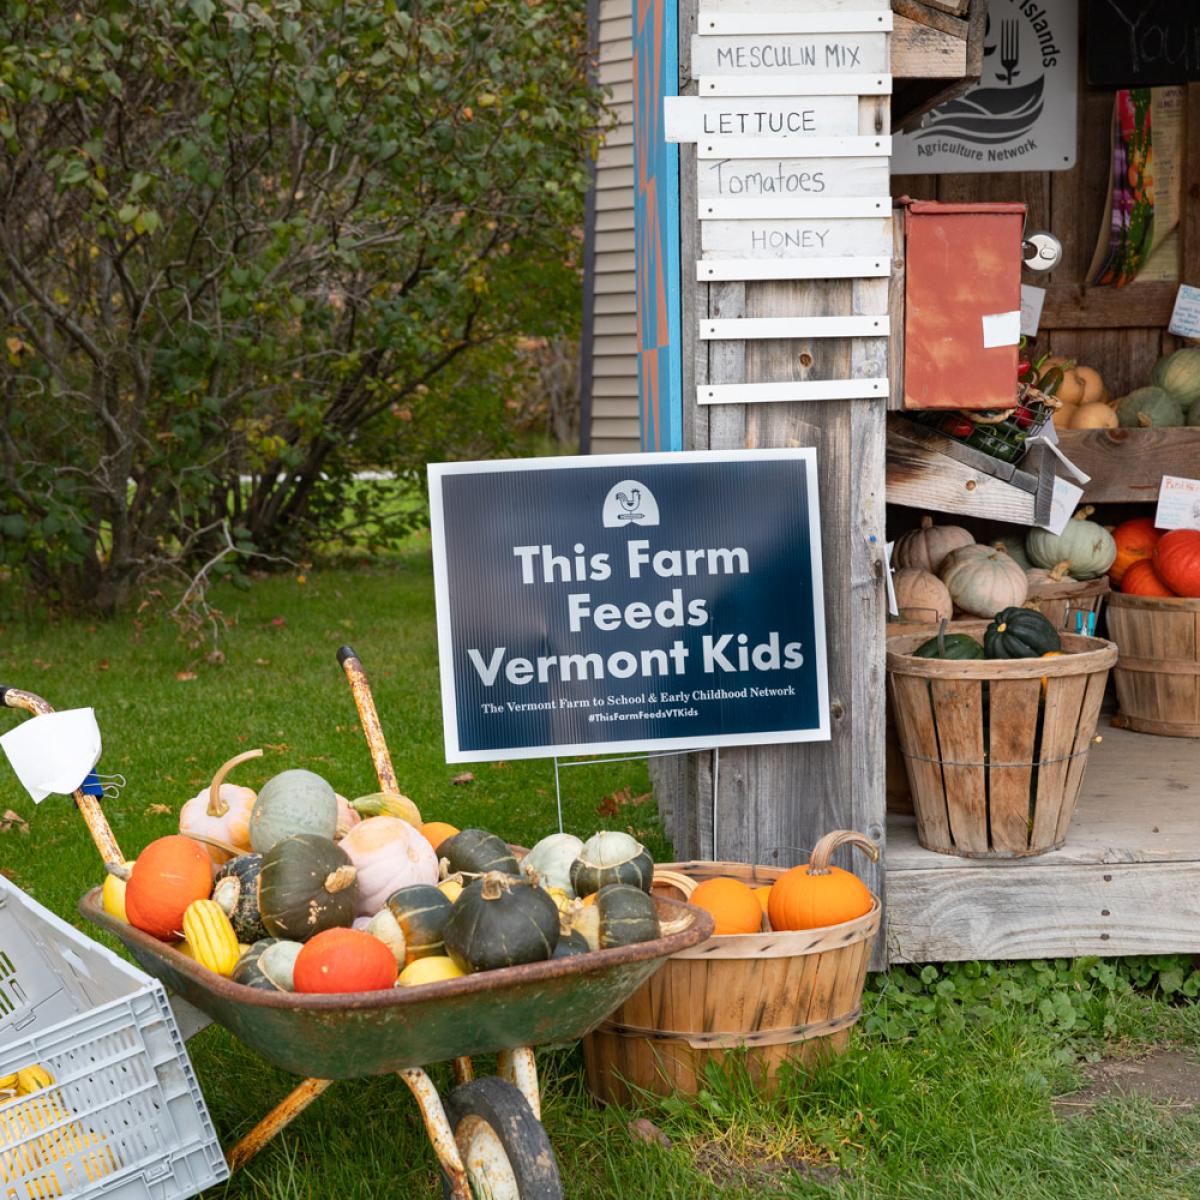 The Darby Farmstand in Alburgh, Vermont brimming with fall squash, greens, peppers, and more.